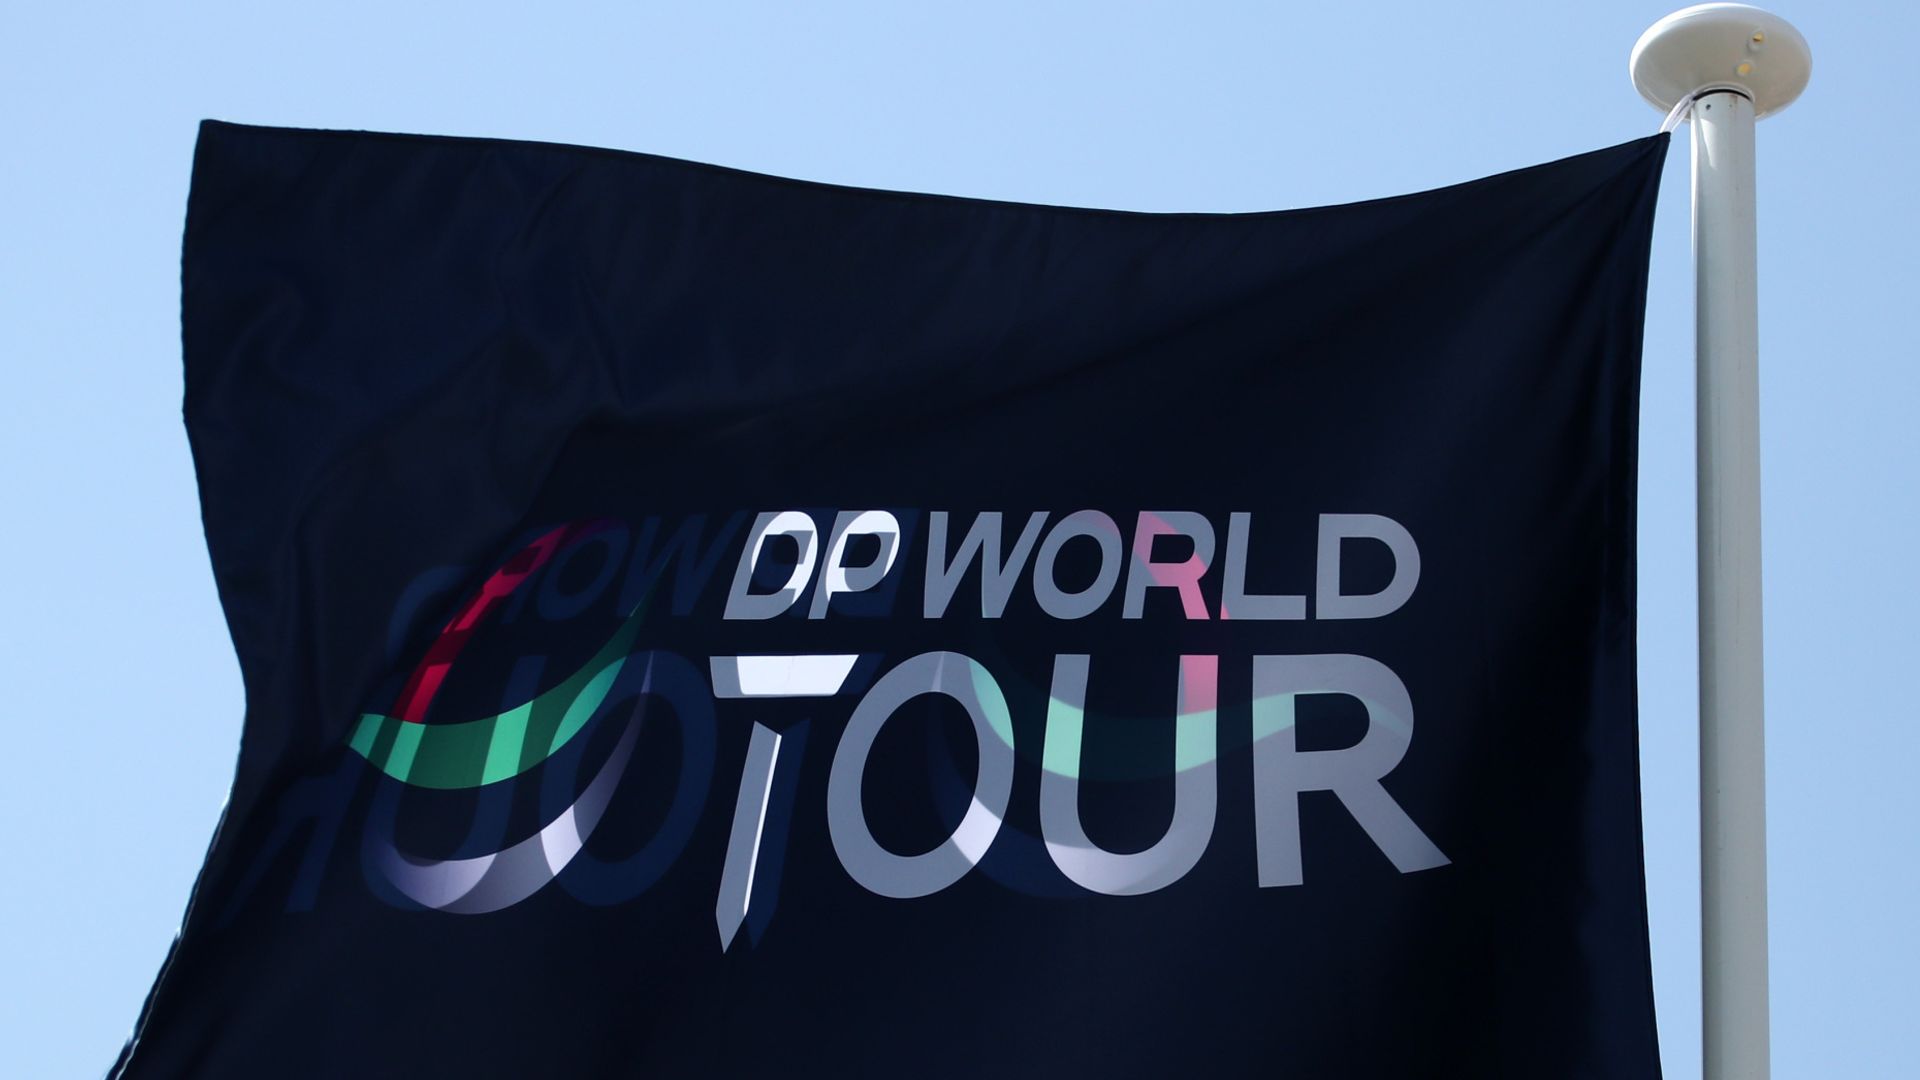 DP World Tour players given pay guarantee for first time from 2023 season